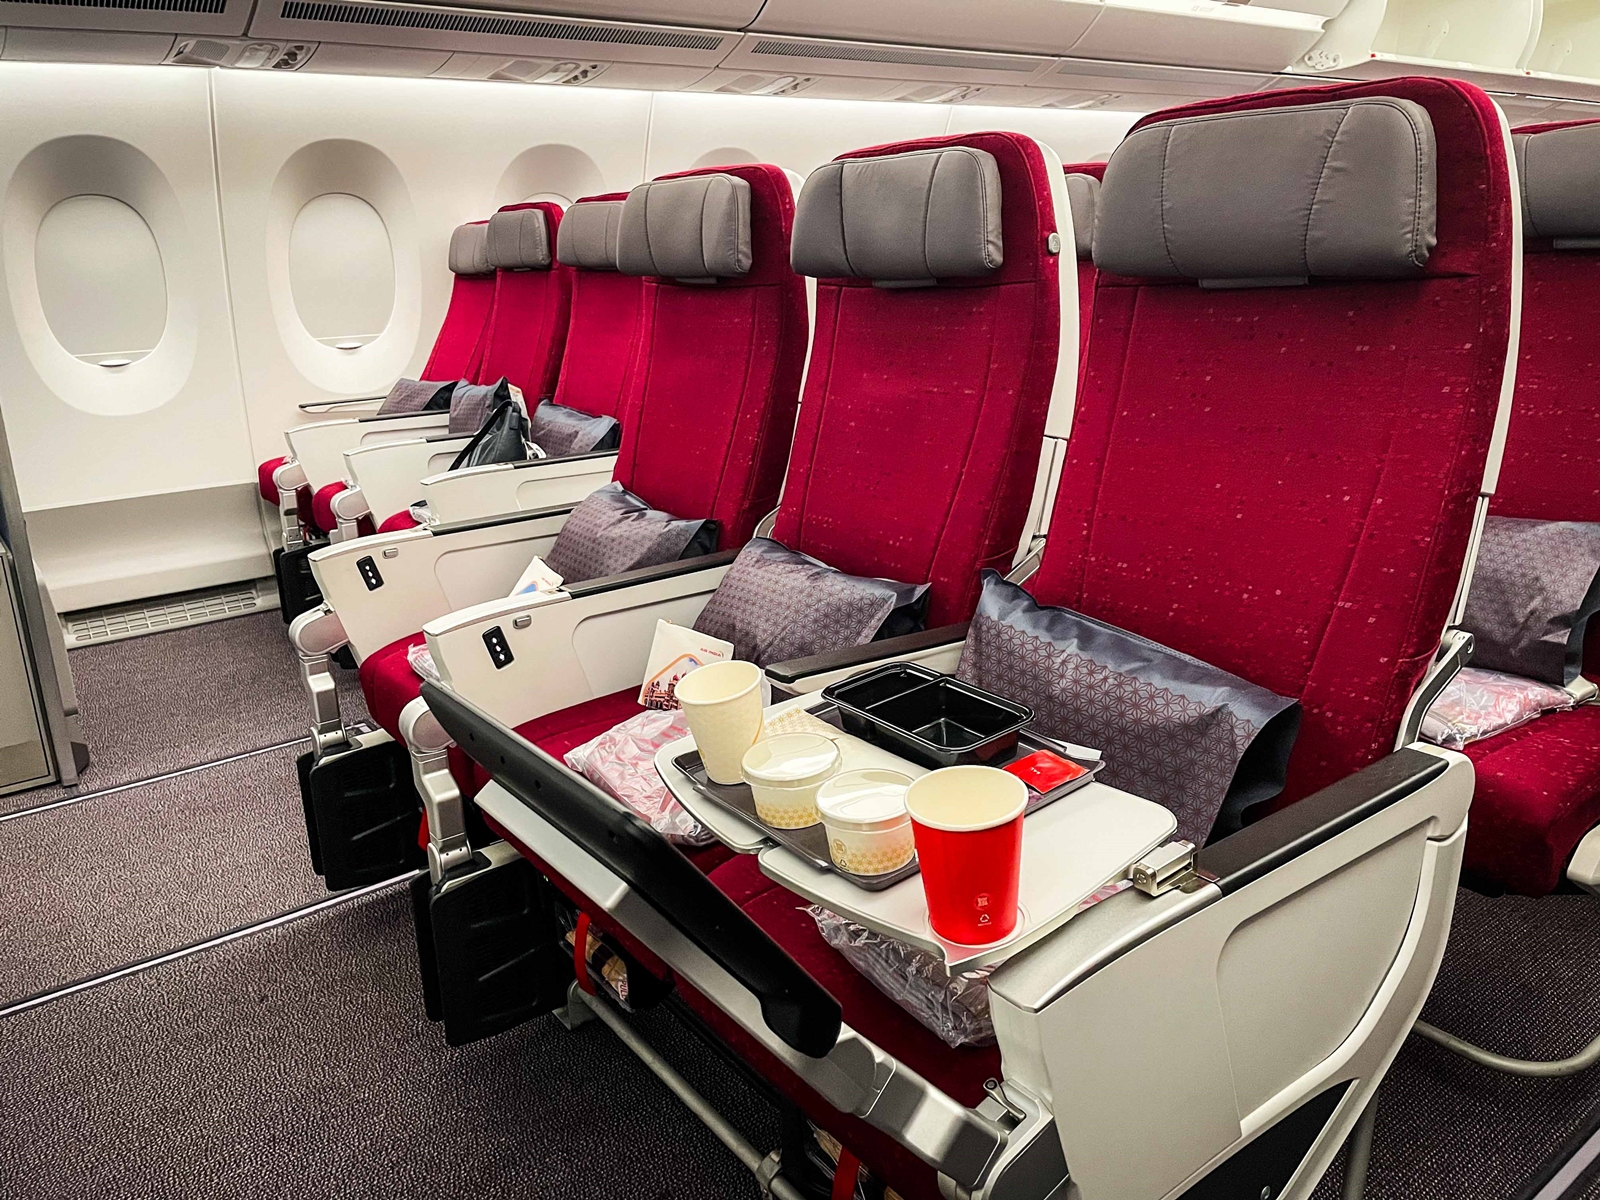 Economy class fliers on ultra-long-haul flights will also be provided with amenity kits.